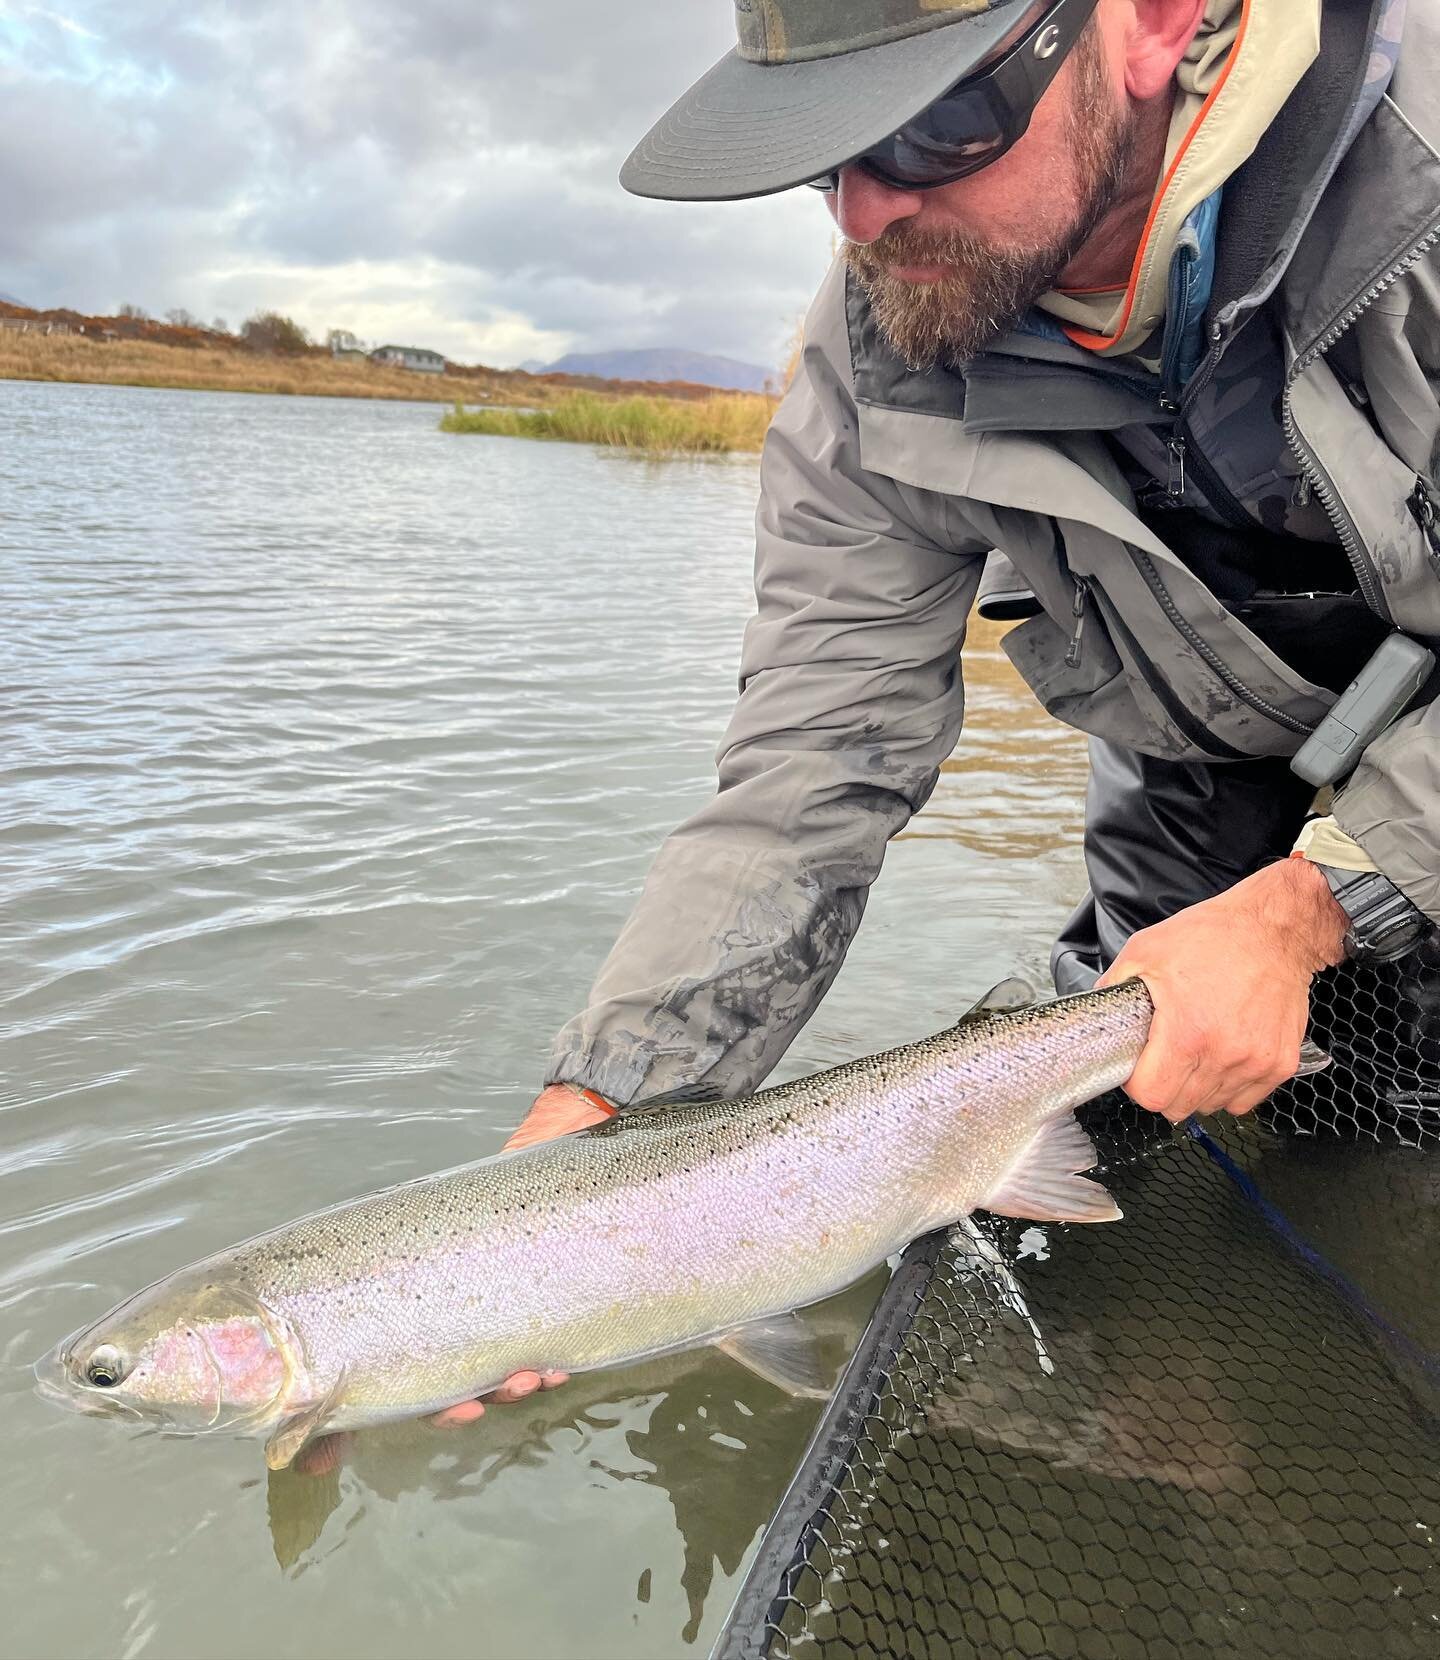 A beautiful wild hen back to a beautiful wild river, we are so lucky to call this incredible state home! 

#flyfishing #wildsteelhead #defendthewestsu #tugisthedrug #nopebblemine #fishing #catchandrelease #nocrowds #barbless #tugismydrug #guideslife 